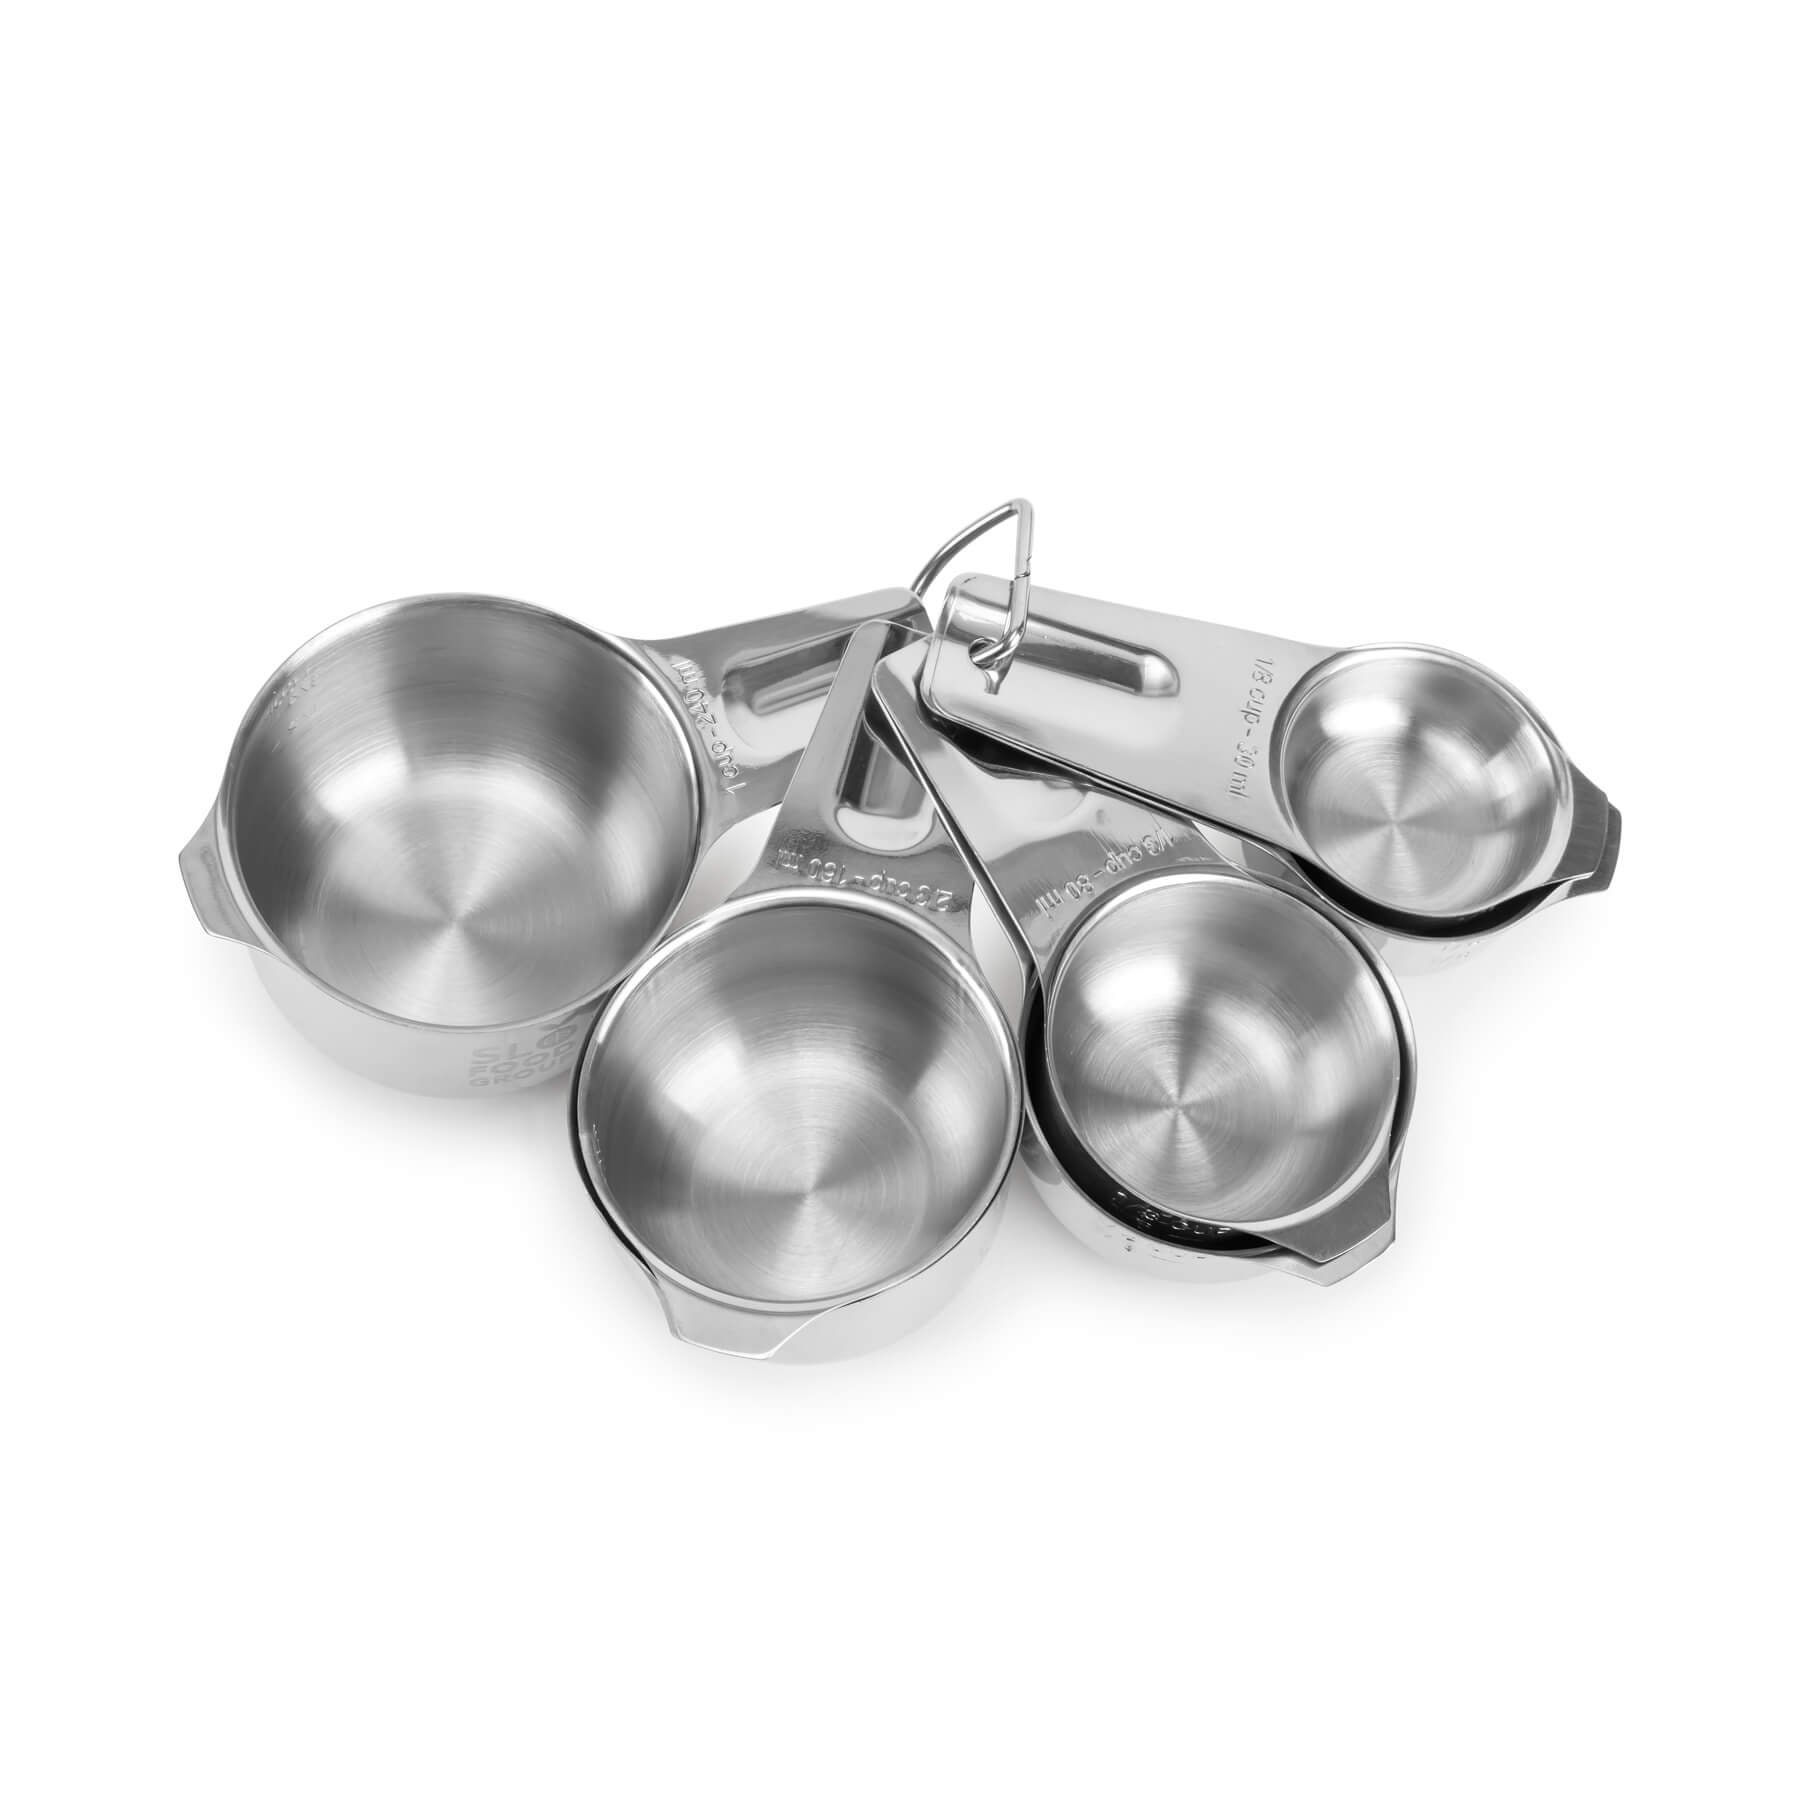 All-Clad Stainless Steel Measuring Cups Set Of 4 Pieces - NWT